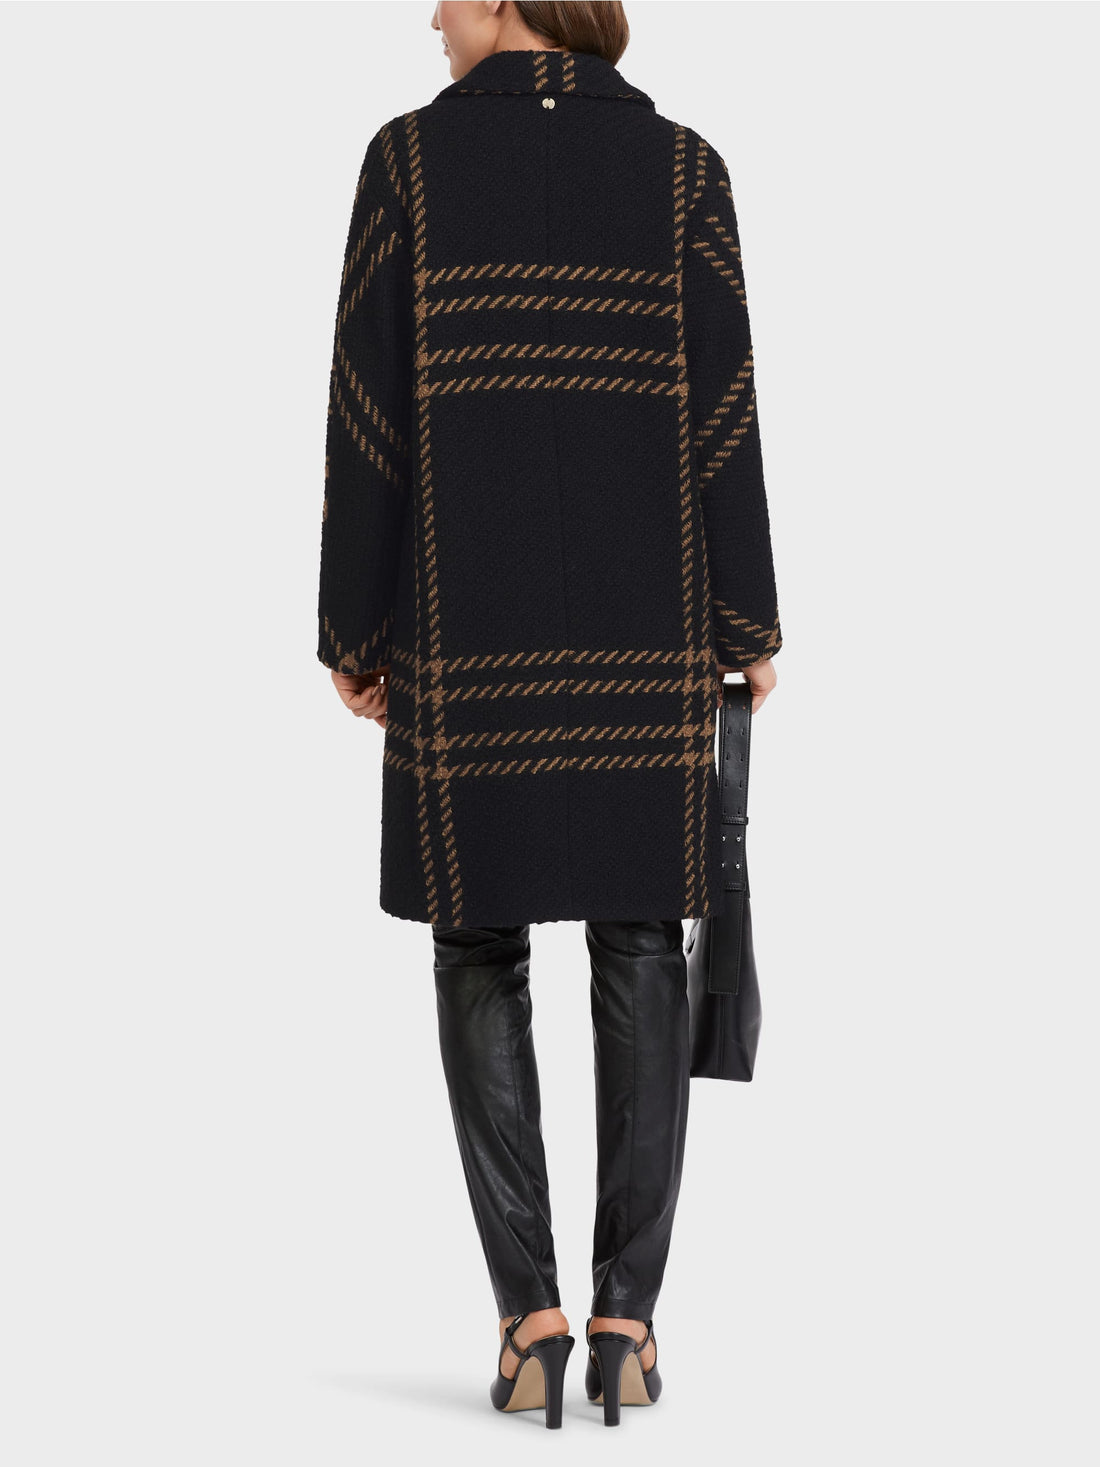 Wool Coat With Large Check_VA 11.04 W11_900_02